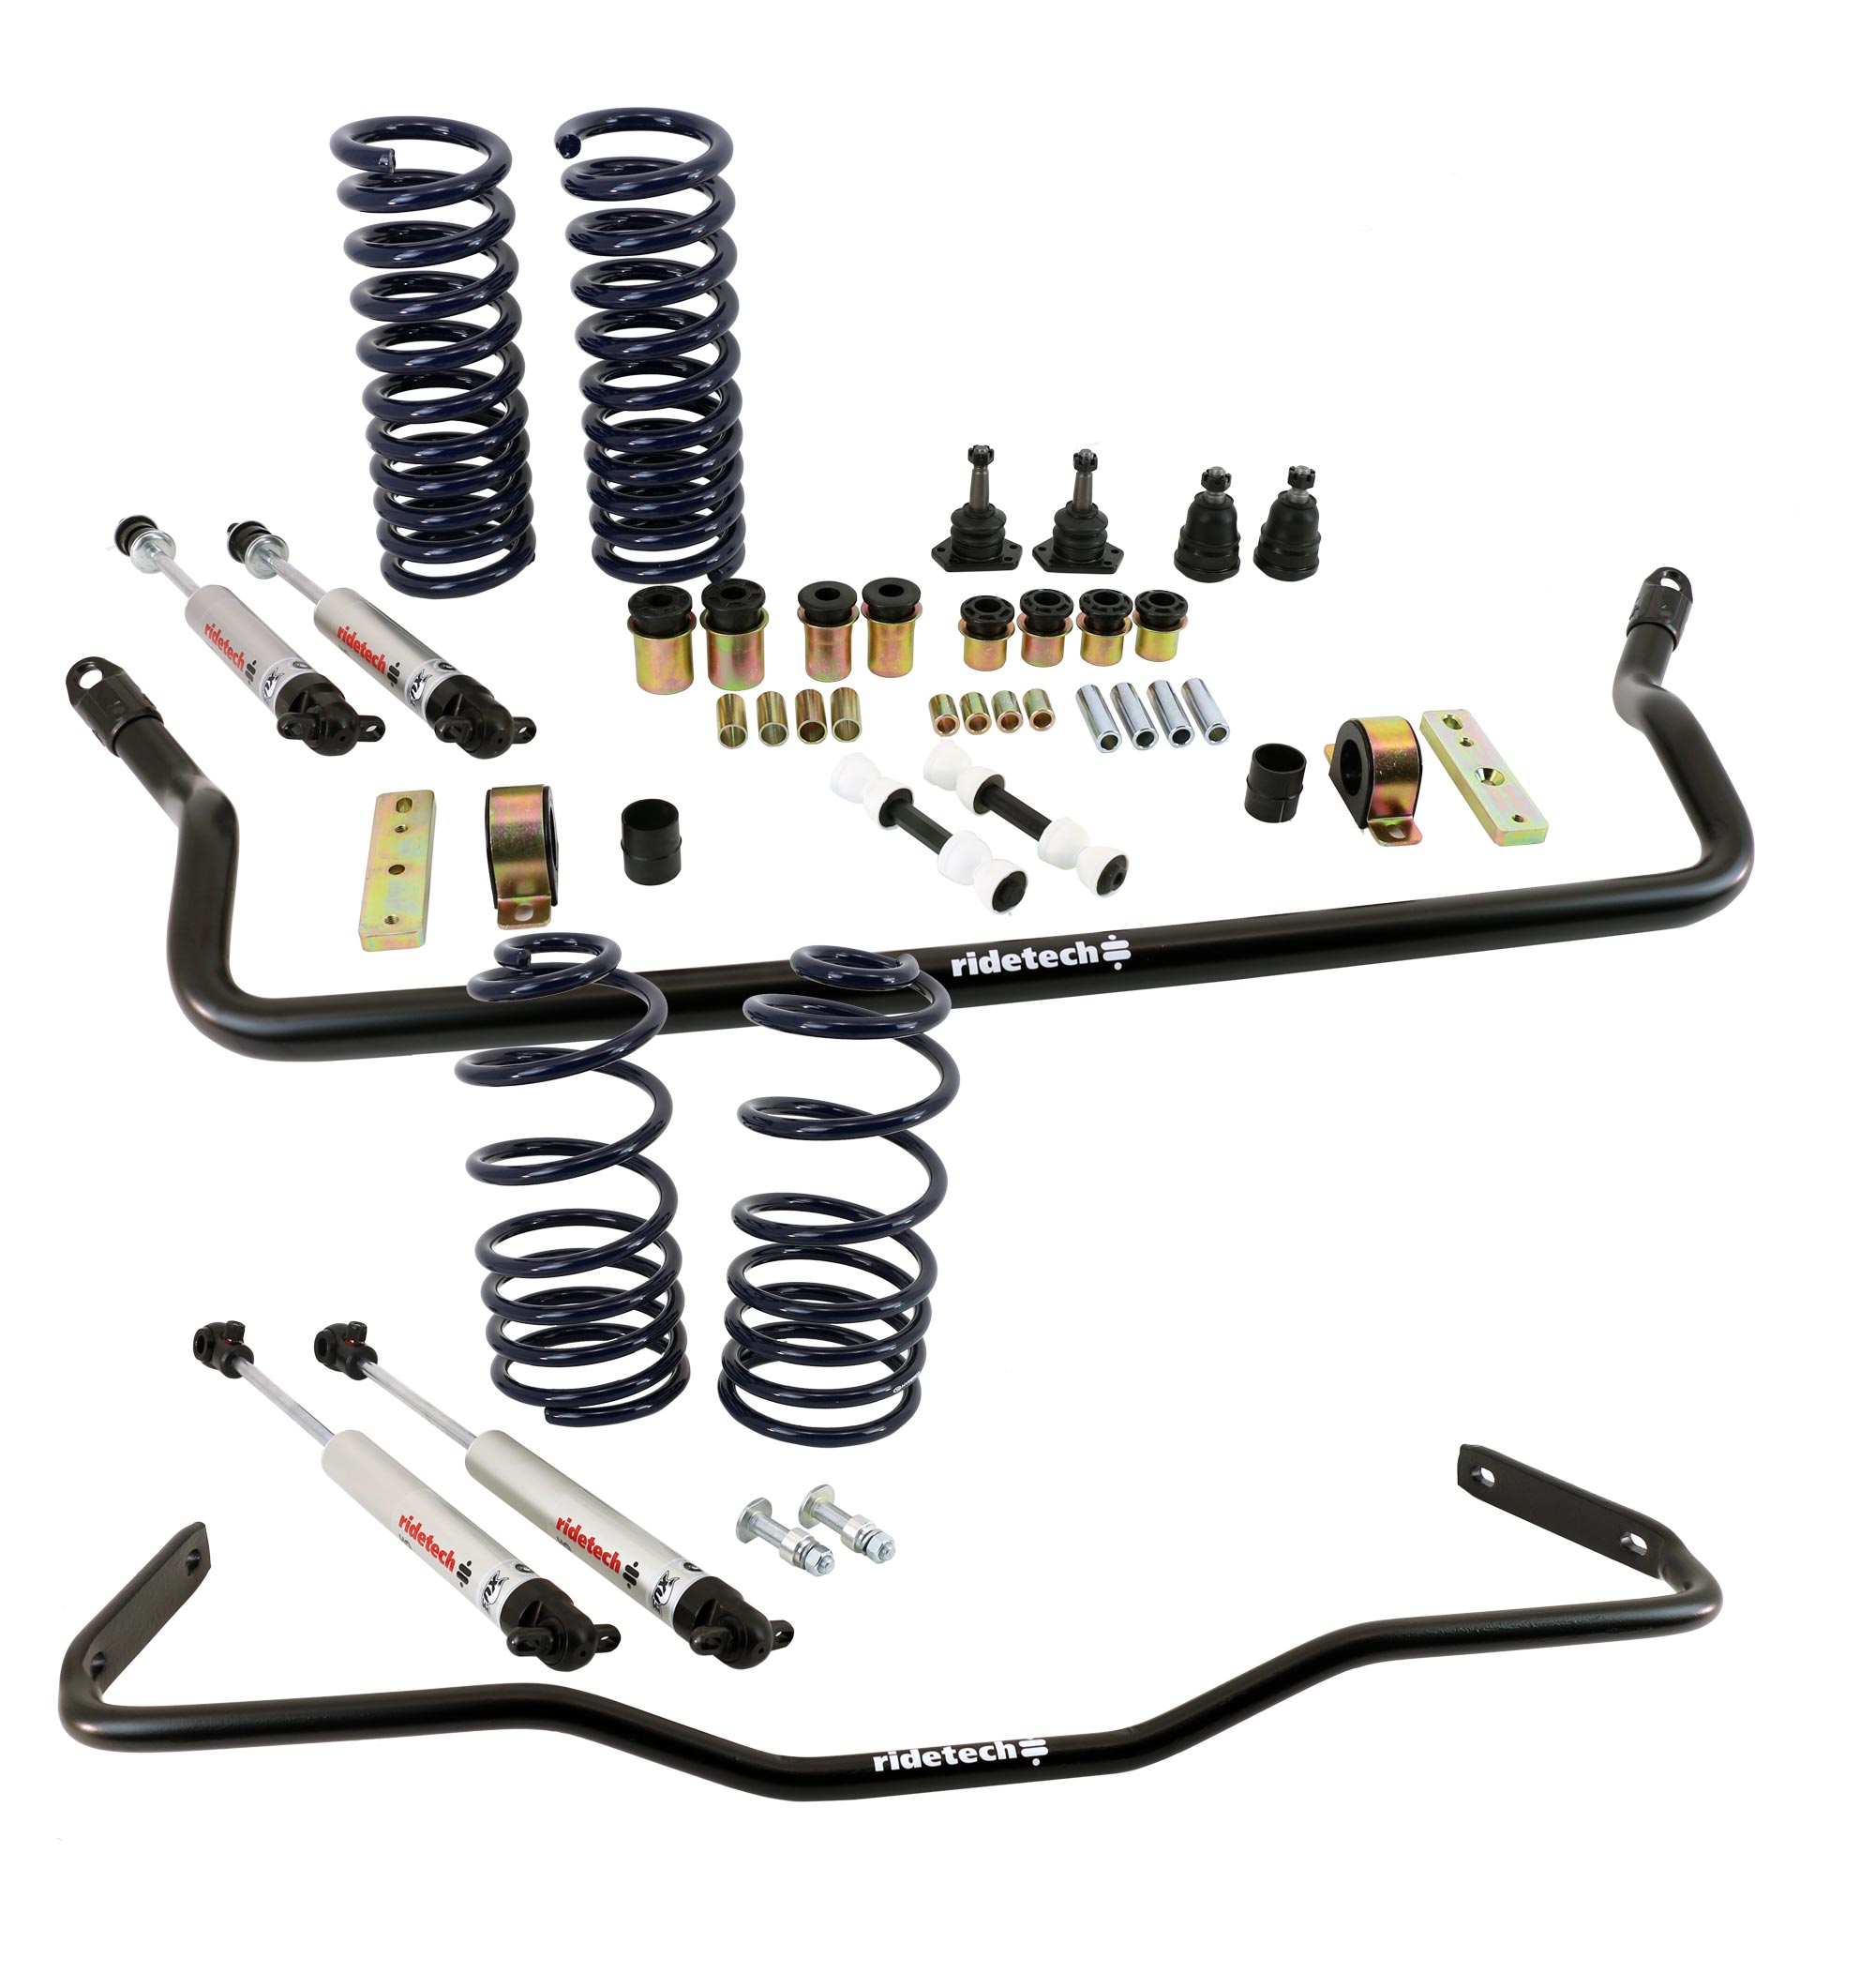 NEW RIDE TECH STREETGRIP SUSPENSION SYSTEM,LEAF SPRINGS,CONTROL ARM BUSHINGS,COILSPRINGS,SWAY BAR,MONO SHOCKS,COMPATIBLE WITH 1955-1957 LS SMALL BLOCK 